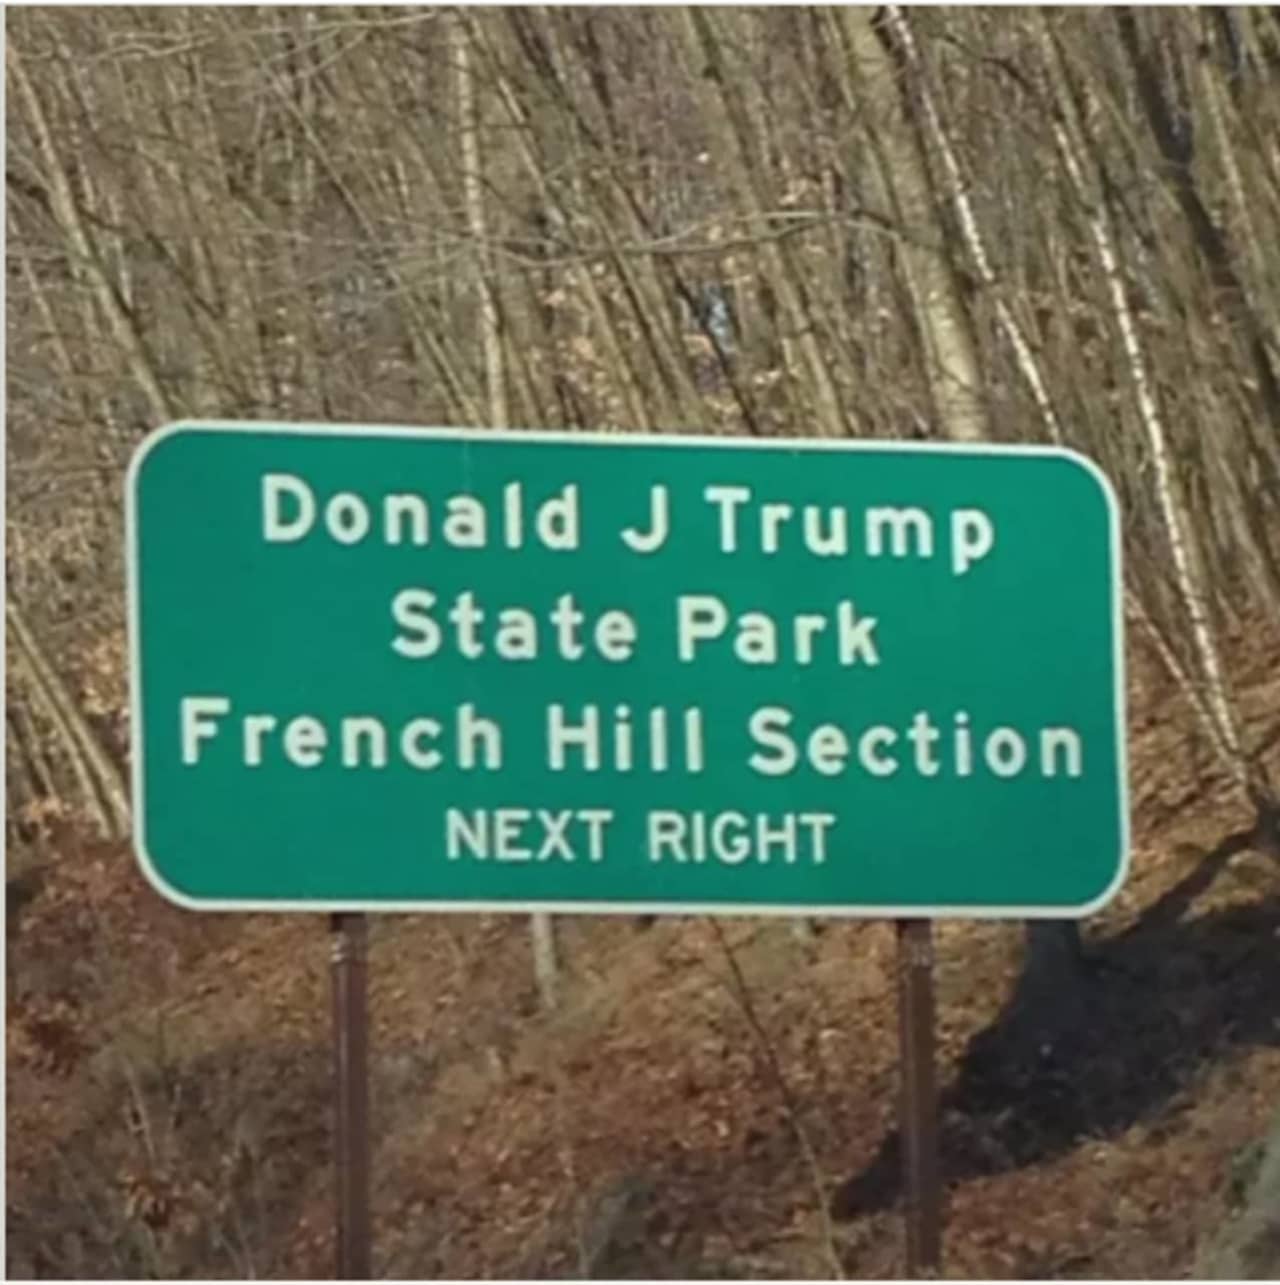 A local lawmaker has suggested changing the name of Donald J. Trump State Park.